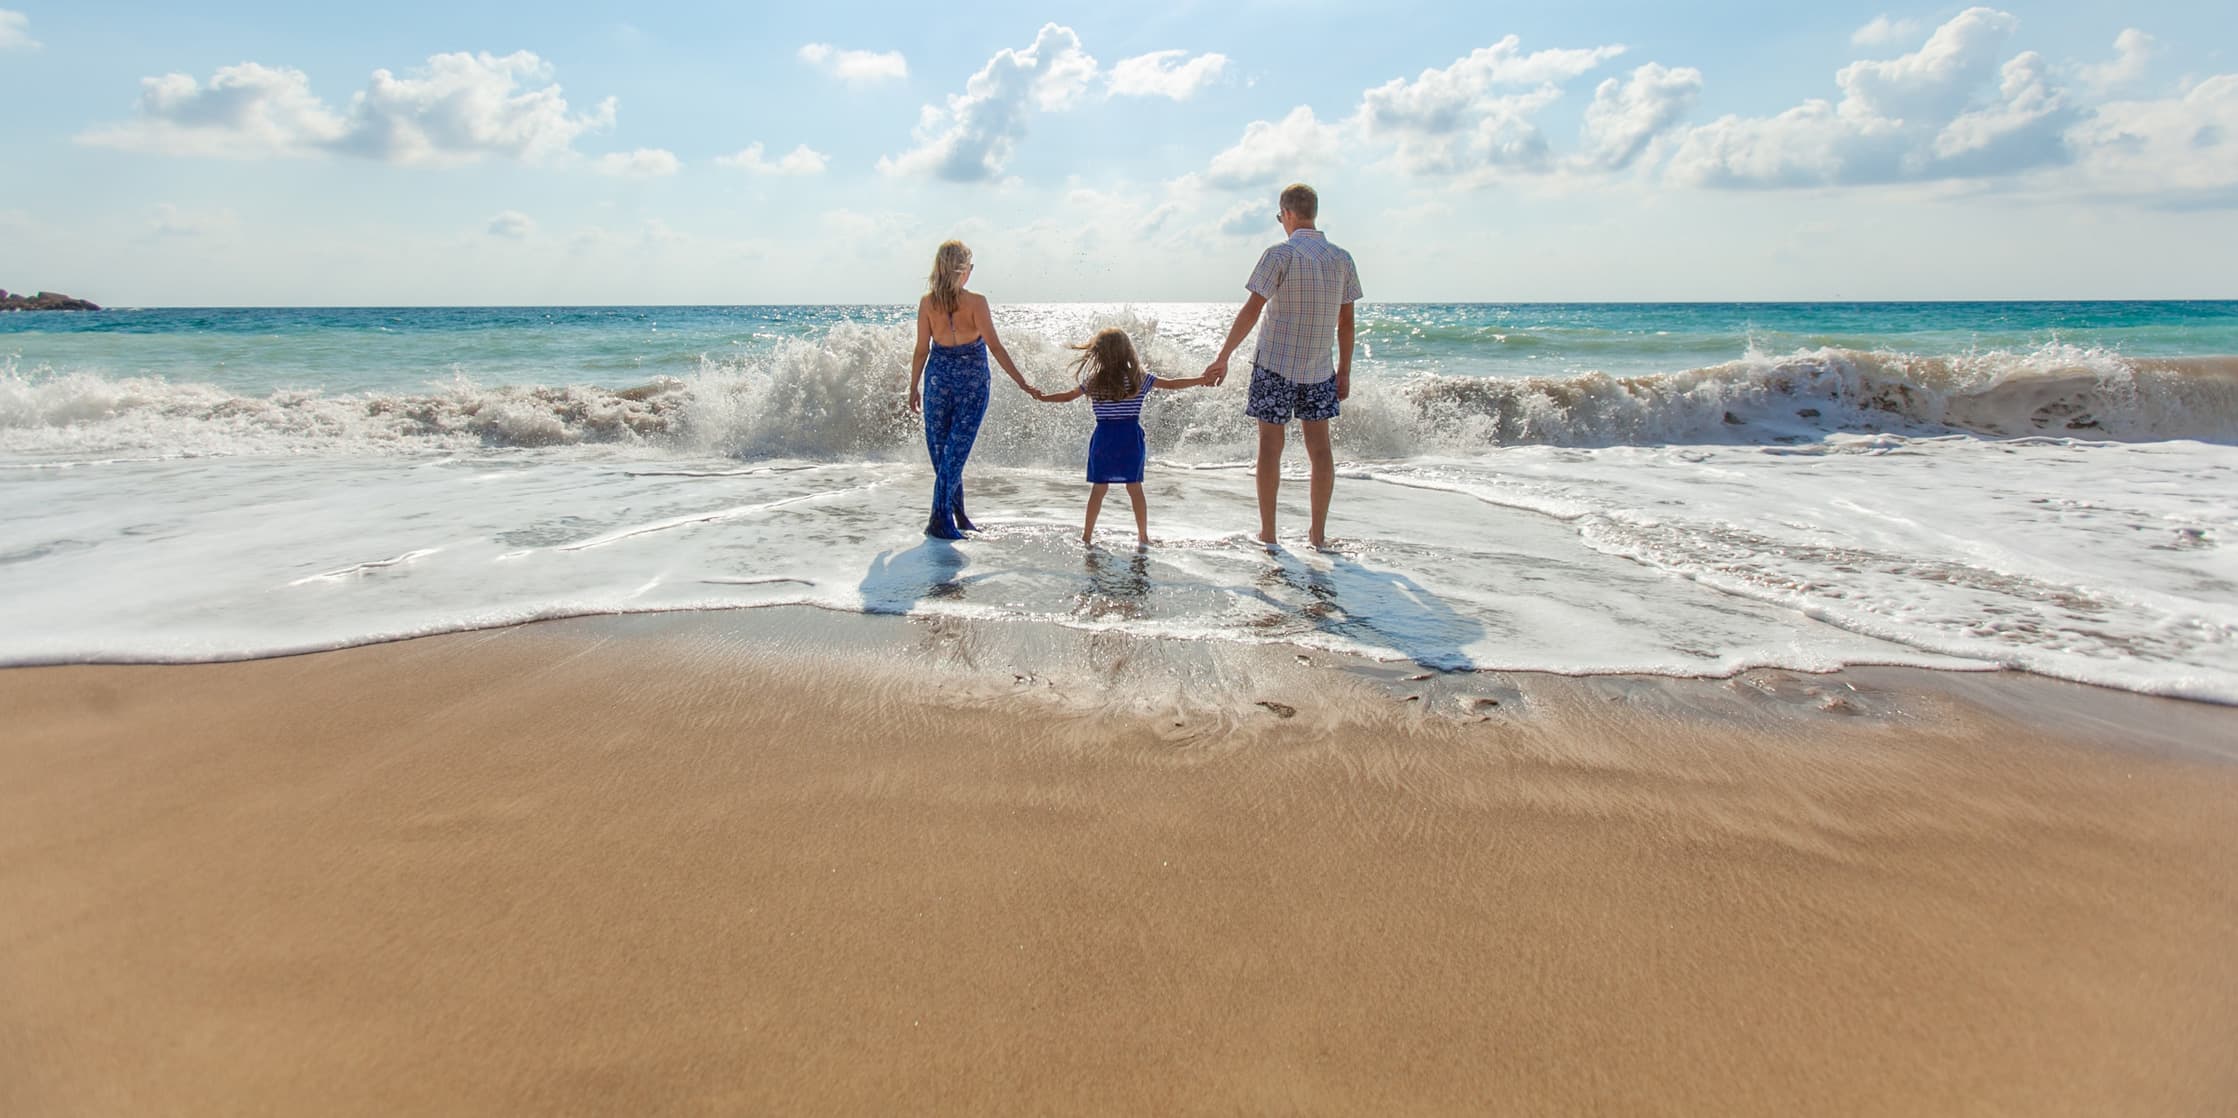 A man, woman, and child holding hands in front of crashing beach waves